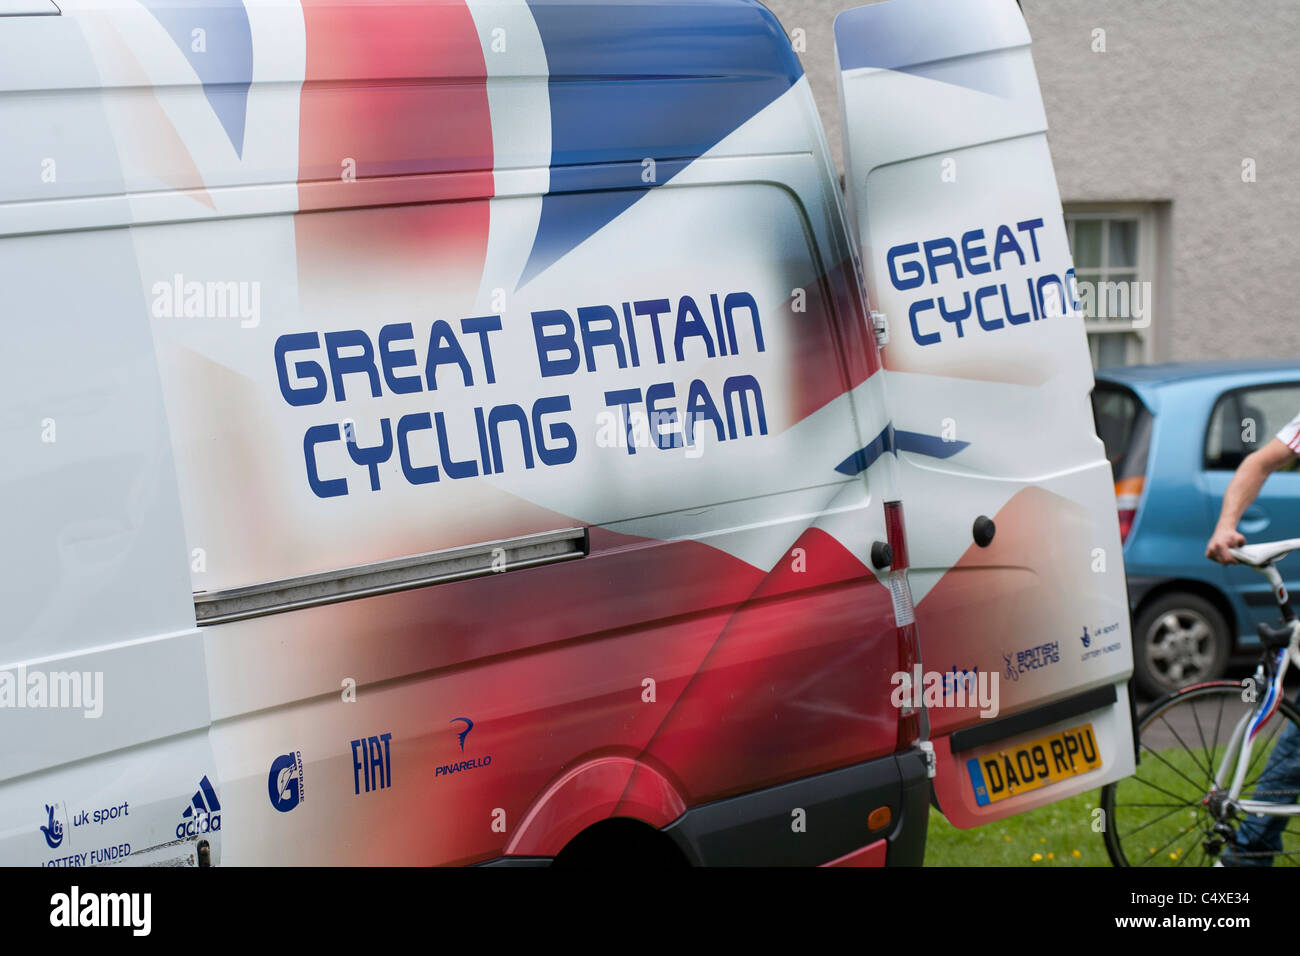 A van belonging to Great Britain Cycling Team Stock Photo